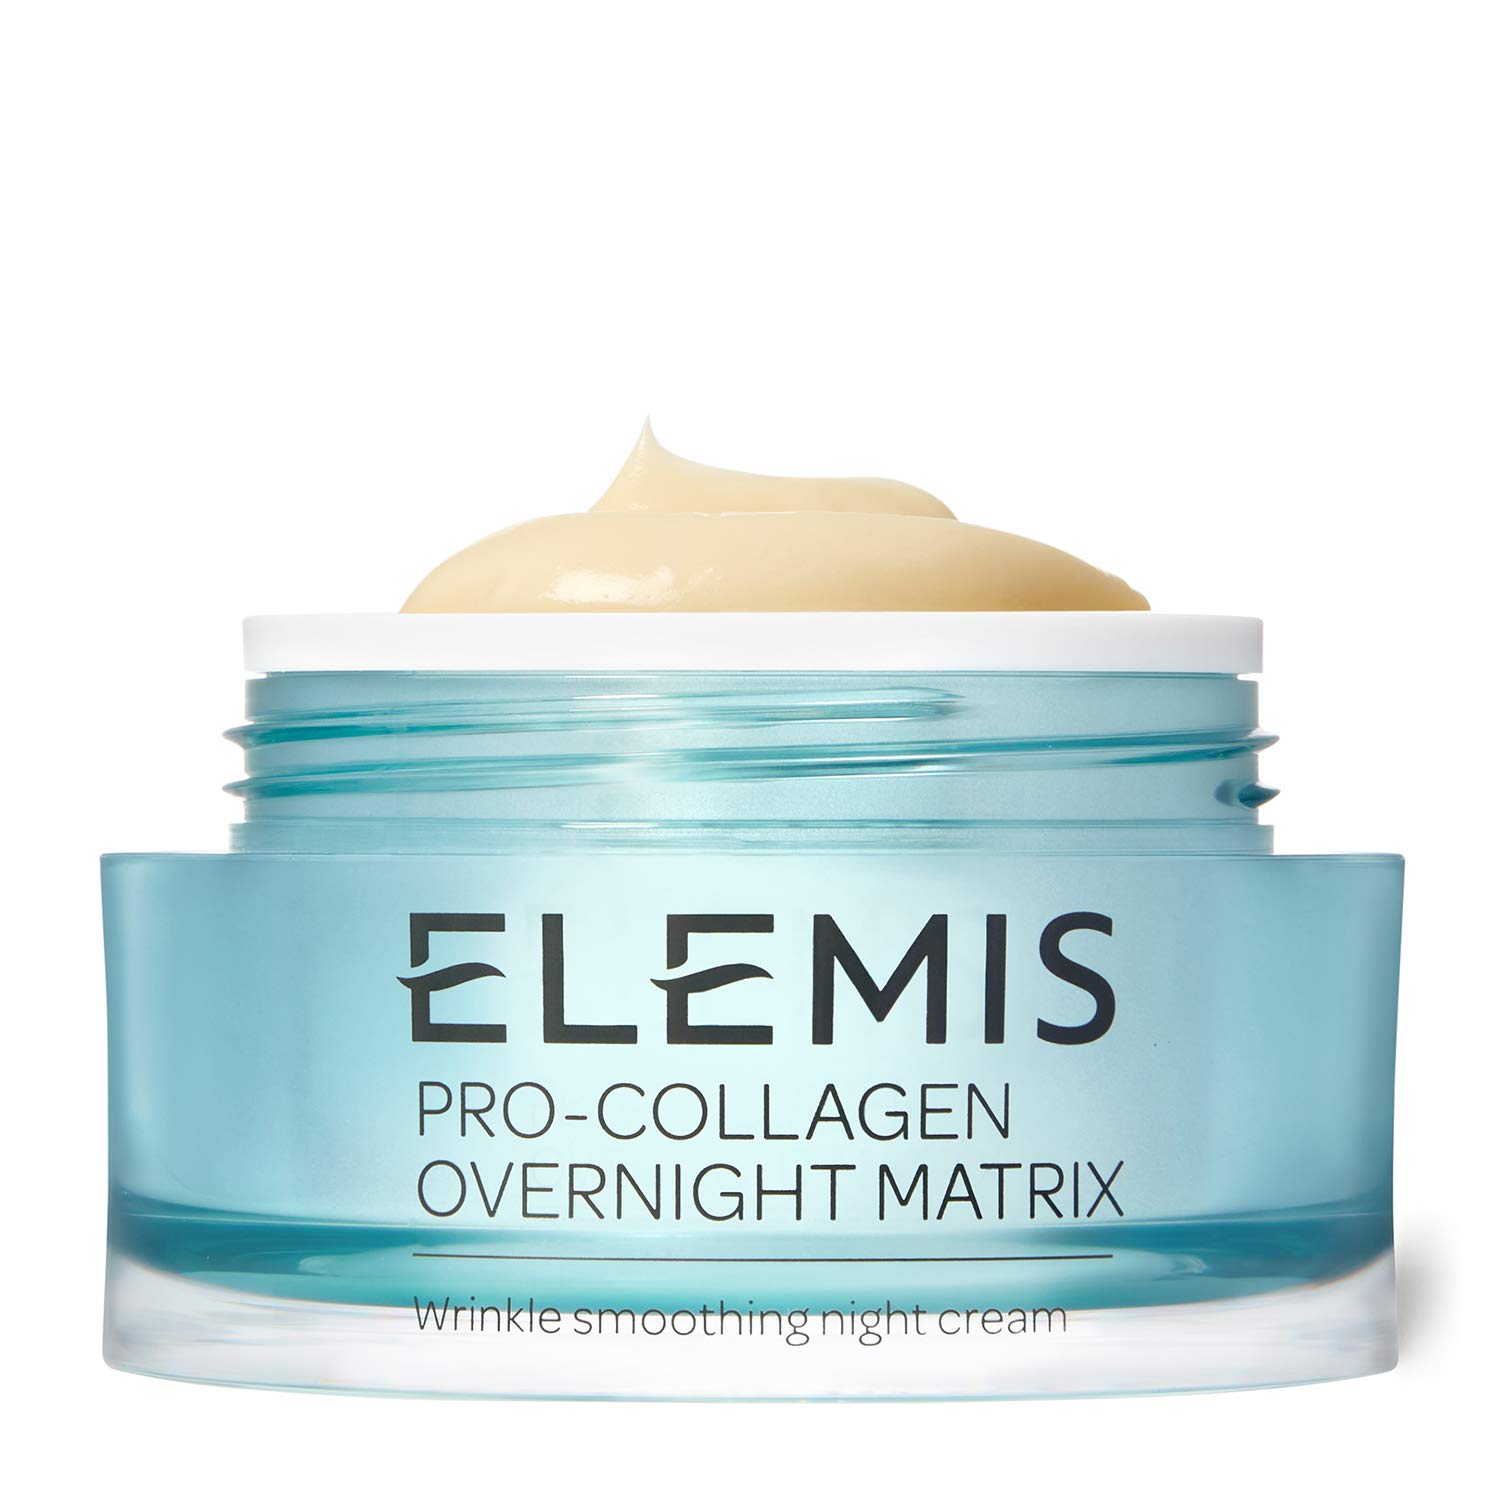 ELEMIS Pro-Collagen Overnight Matrix | Wrinkle Smoothing Night Cream Deeply Hydrates, Smoothes, Firms, and Replenishes Stressed-Looking Skin | 50 mL